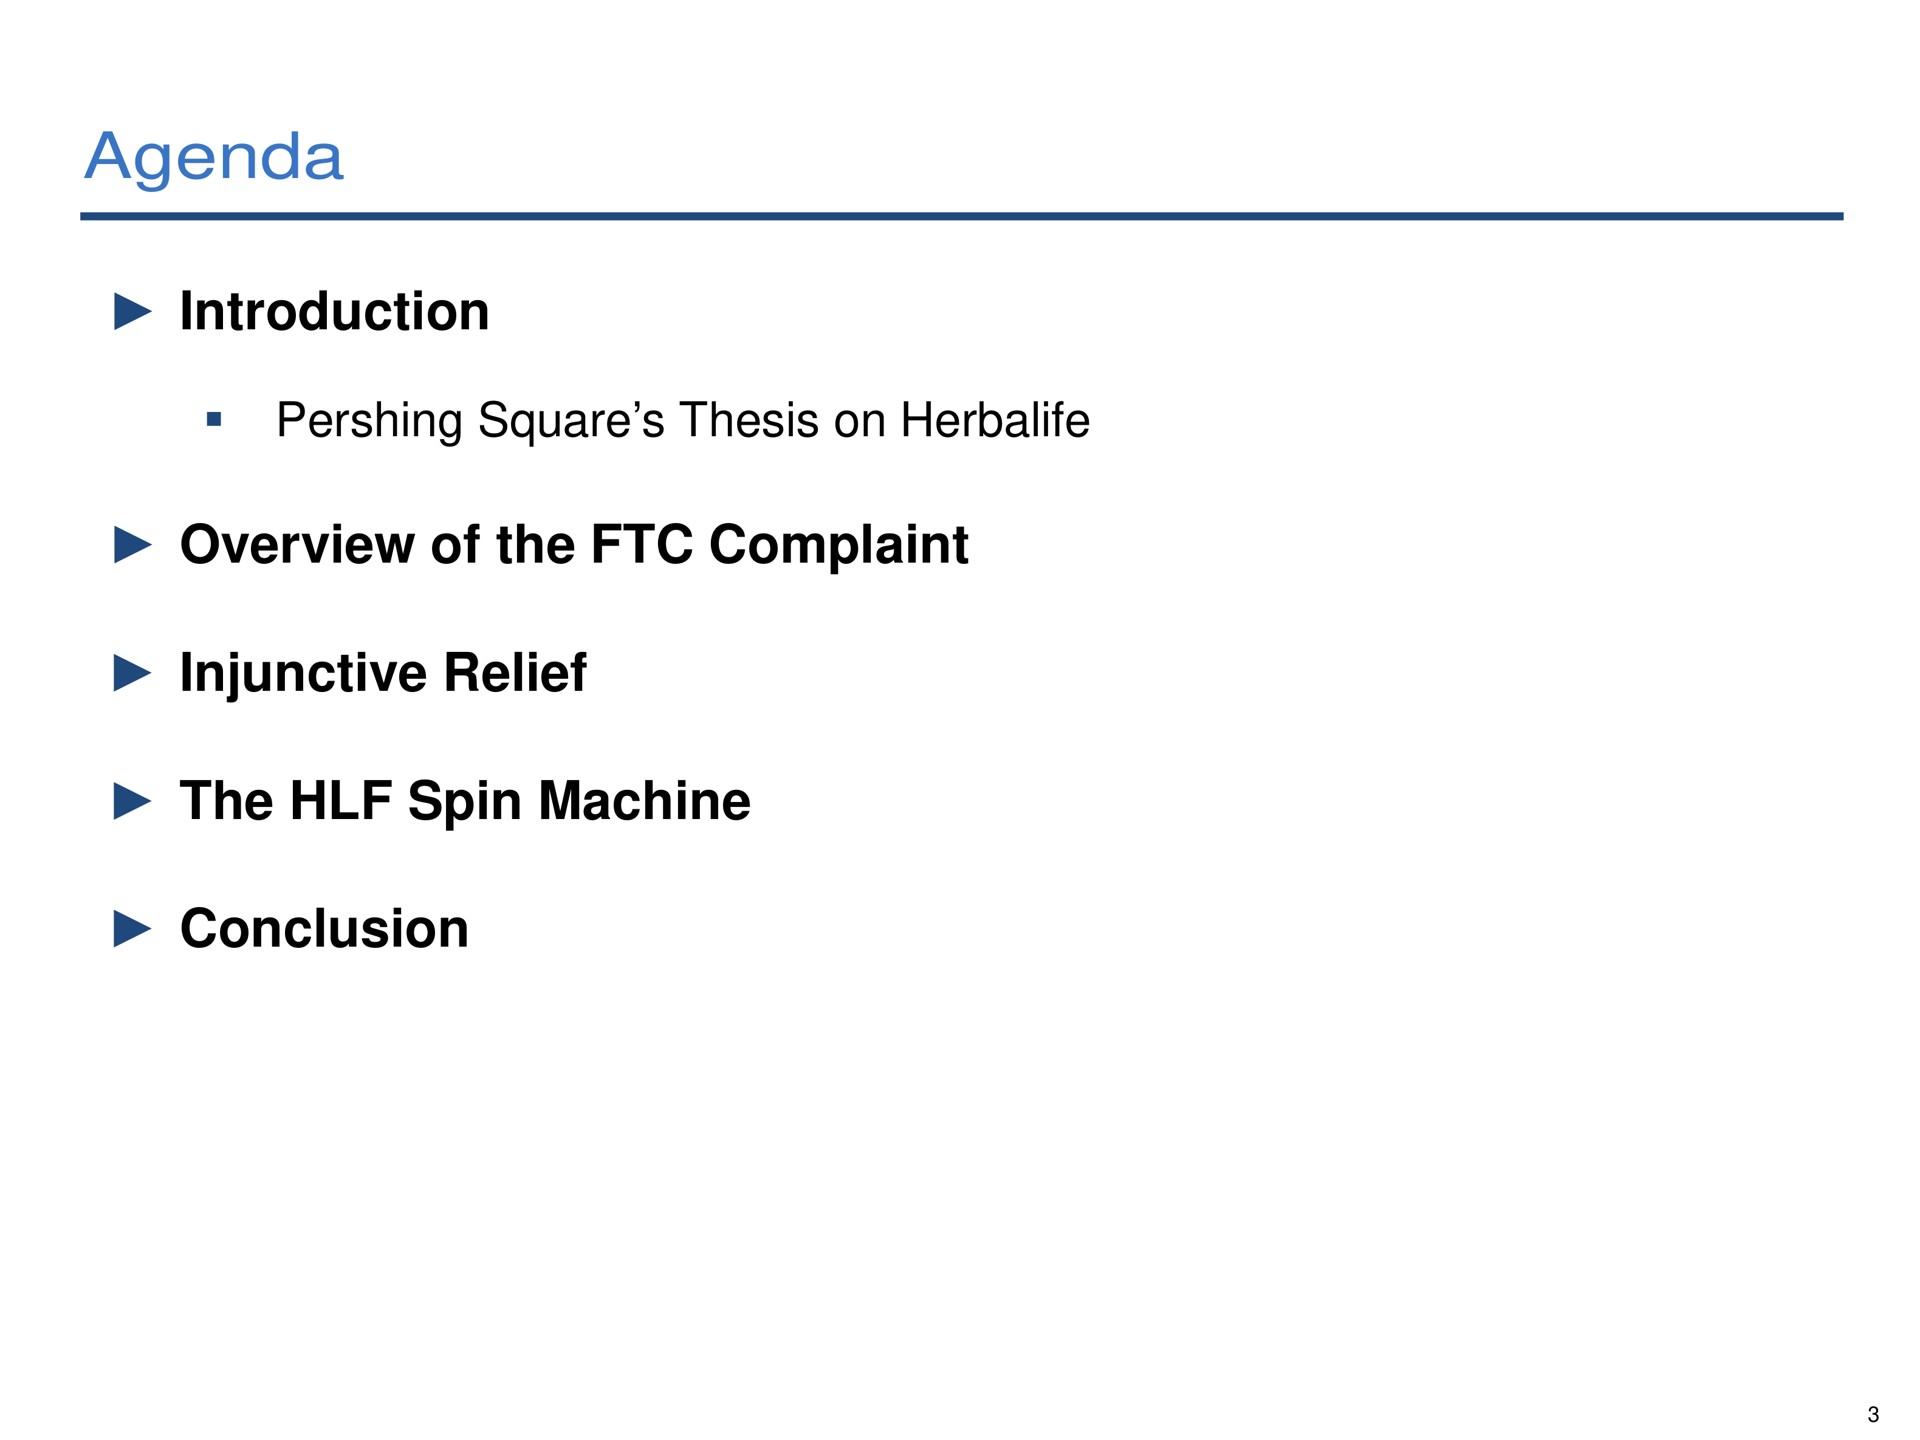 agenda introduction overview of the complaint injunctive relief the spin machine conclusion | Pershing Square